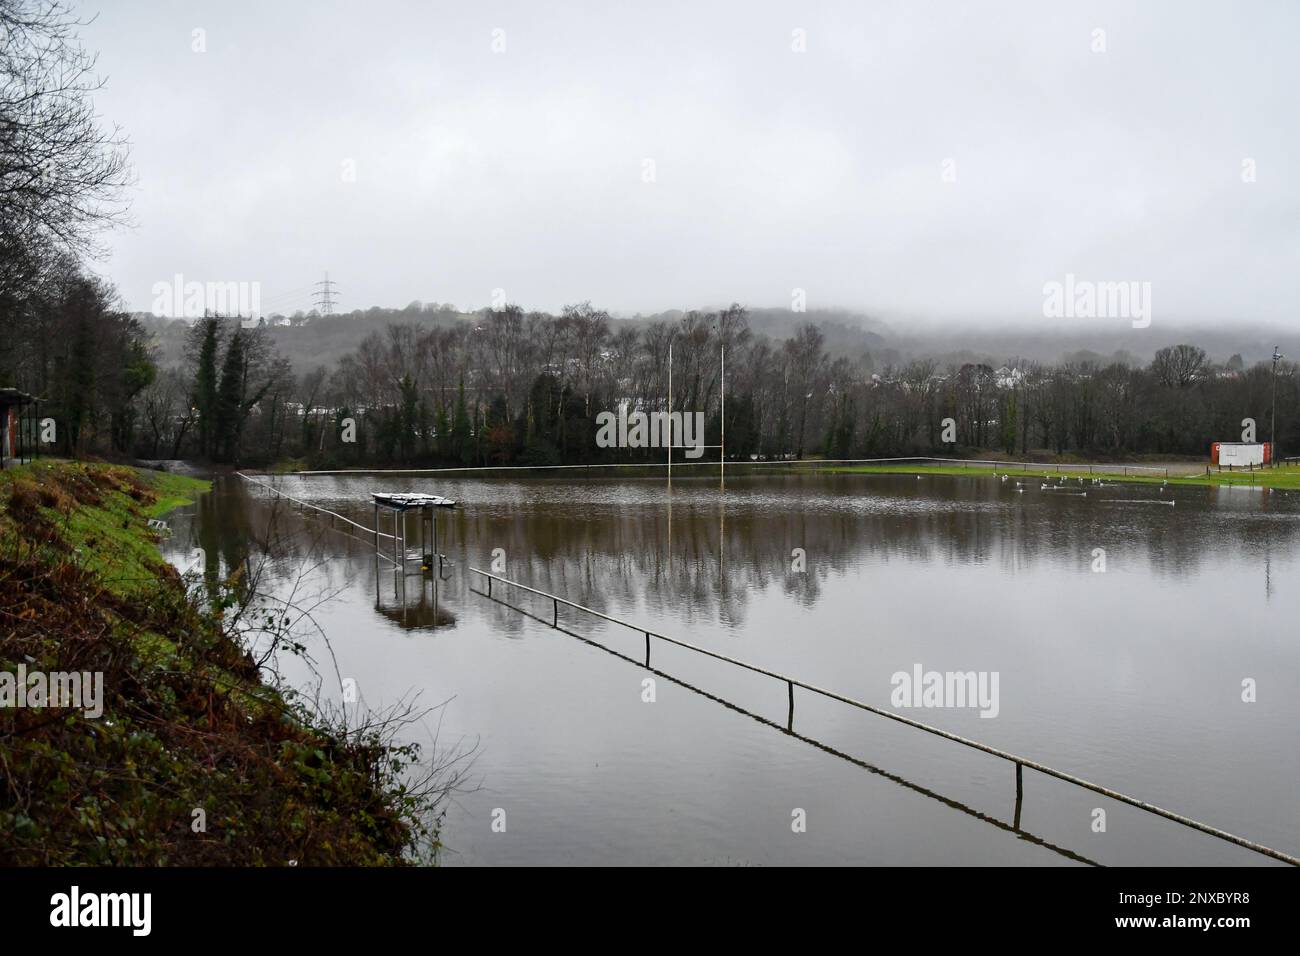 Swansea, Wales. 20 January 2021. The Vardre RFC rugby pitch at Maes y Bioden was flooded after Storm Christoph brought heavy rainfall to the Swansea valley in Wales, UK on 20 January 2021. Credit: Duncan Thomas/Majestic Media/Alamy Live News. Stock Photo